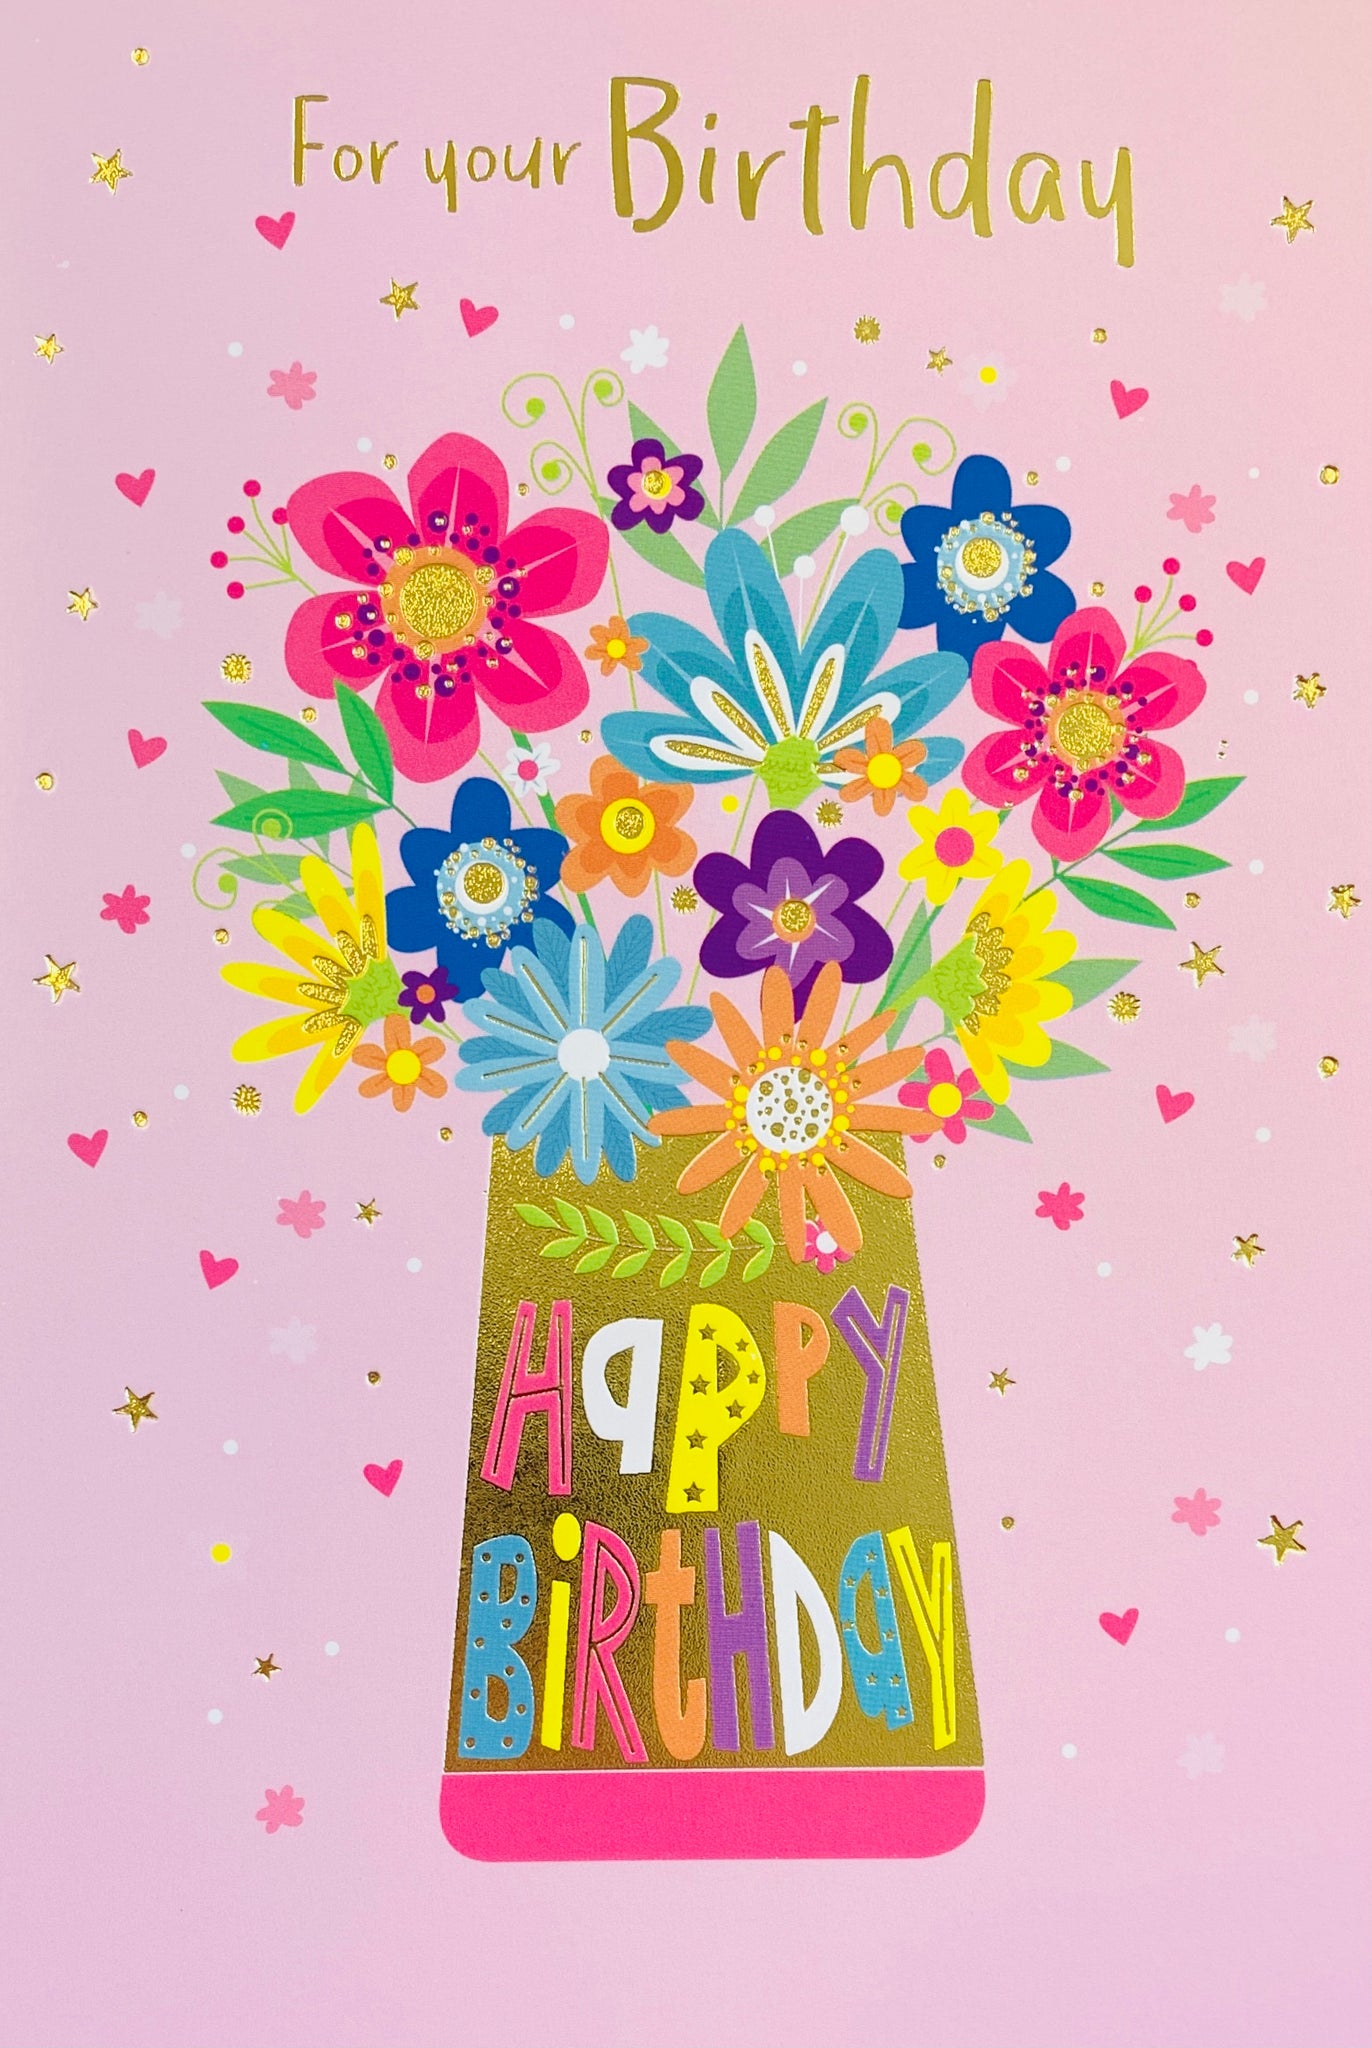 Birthday card for her- flowers